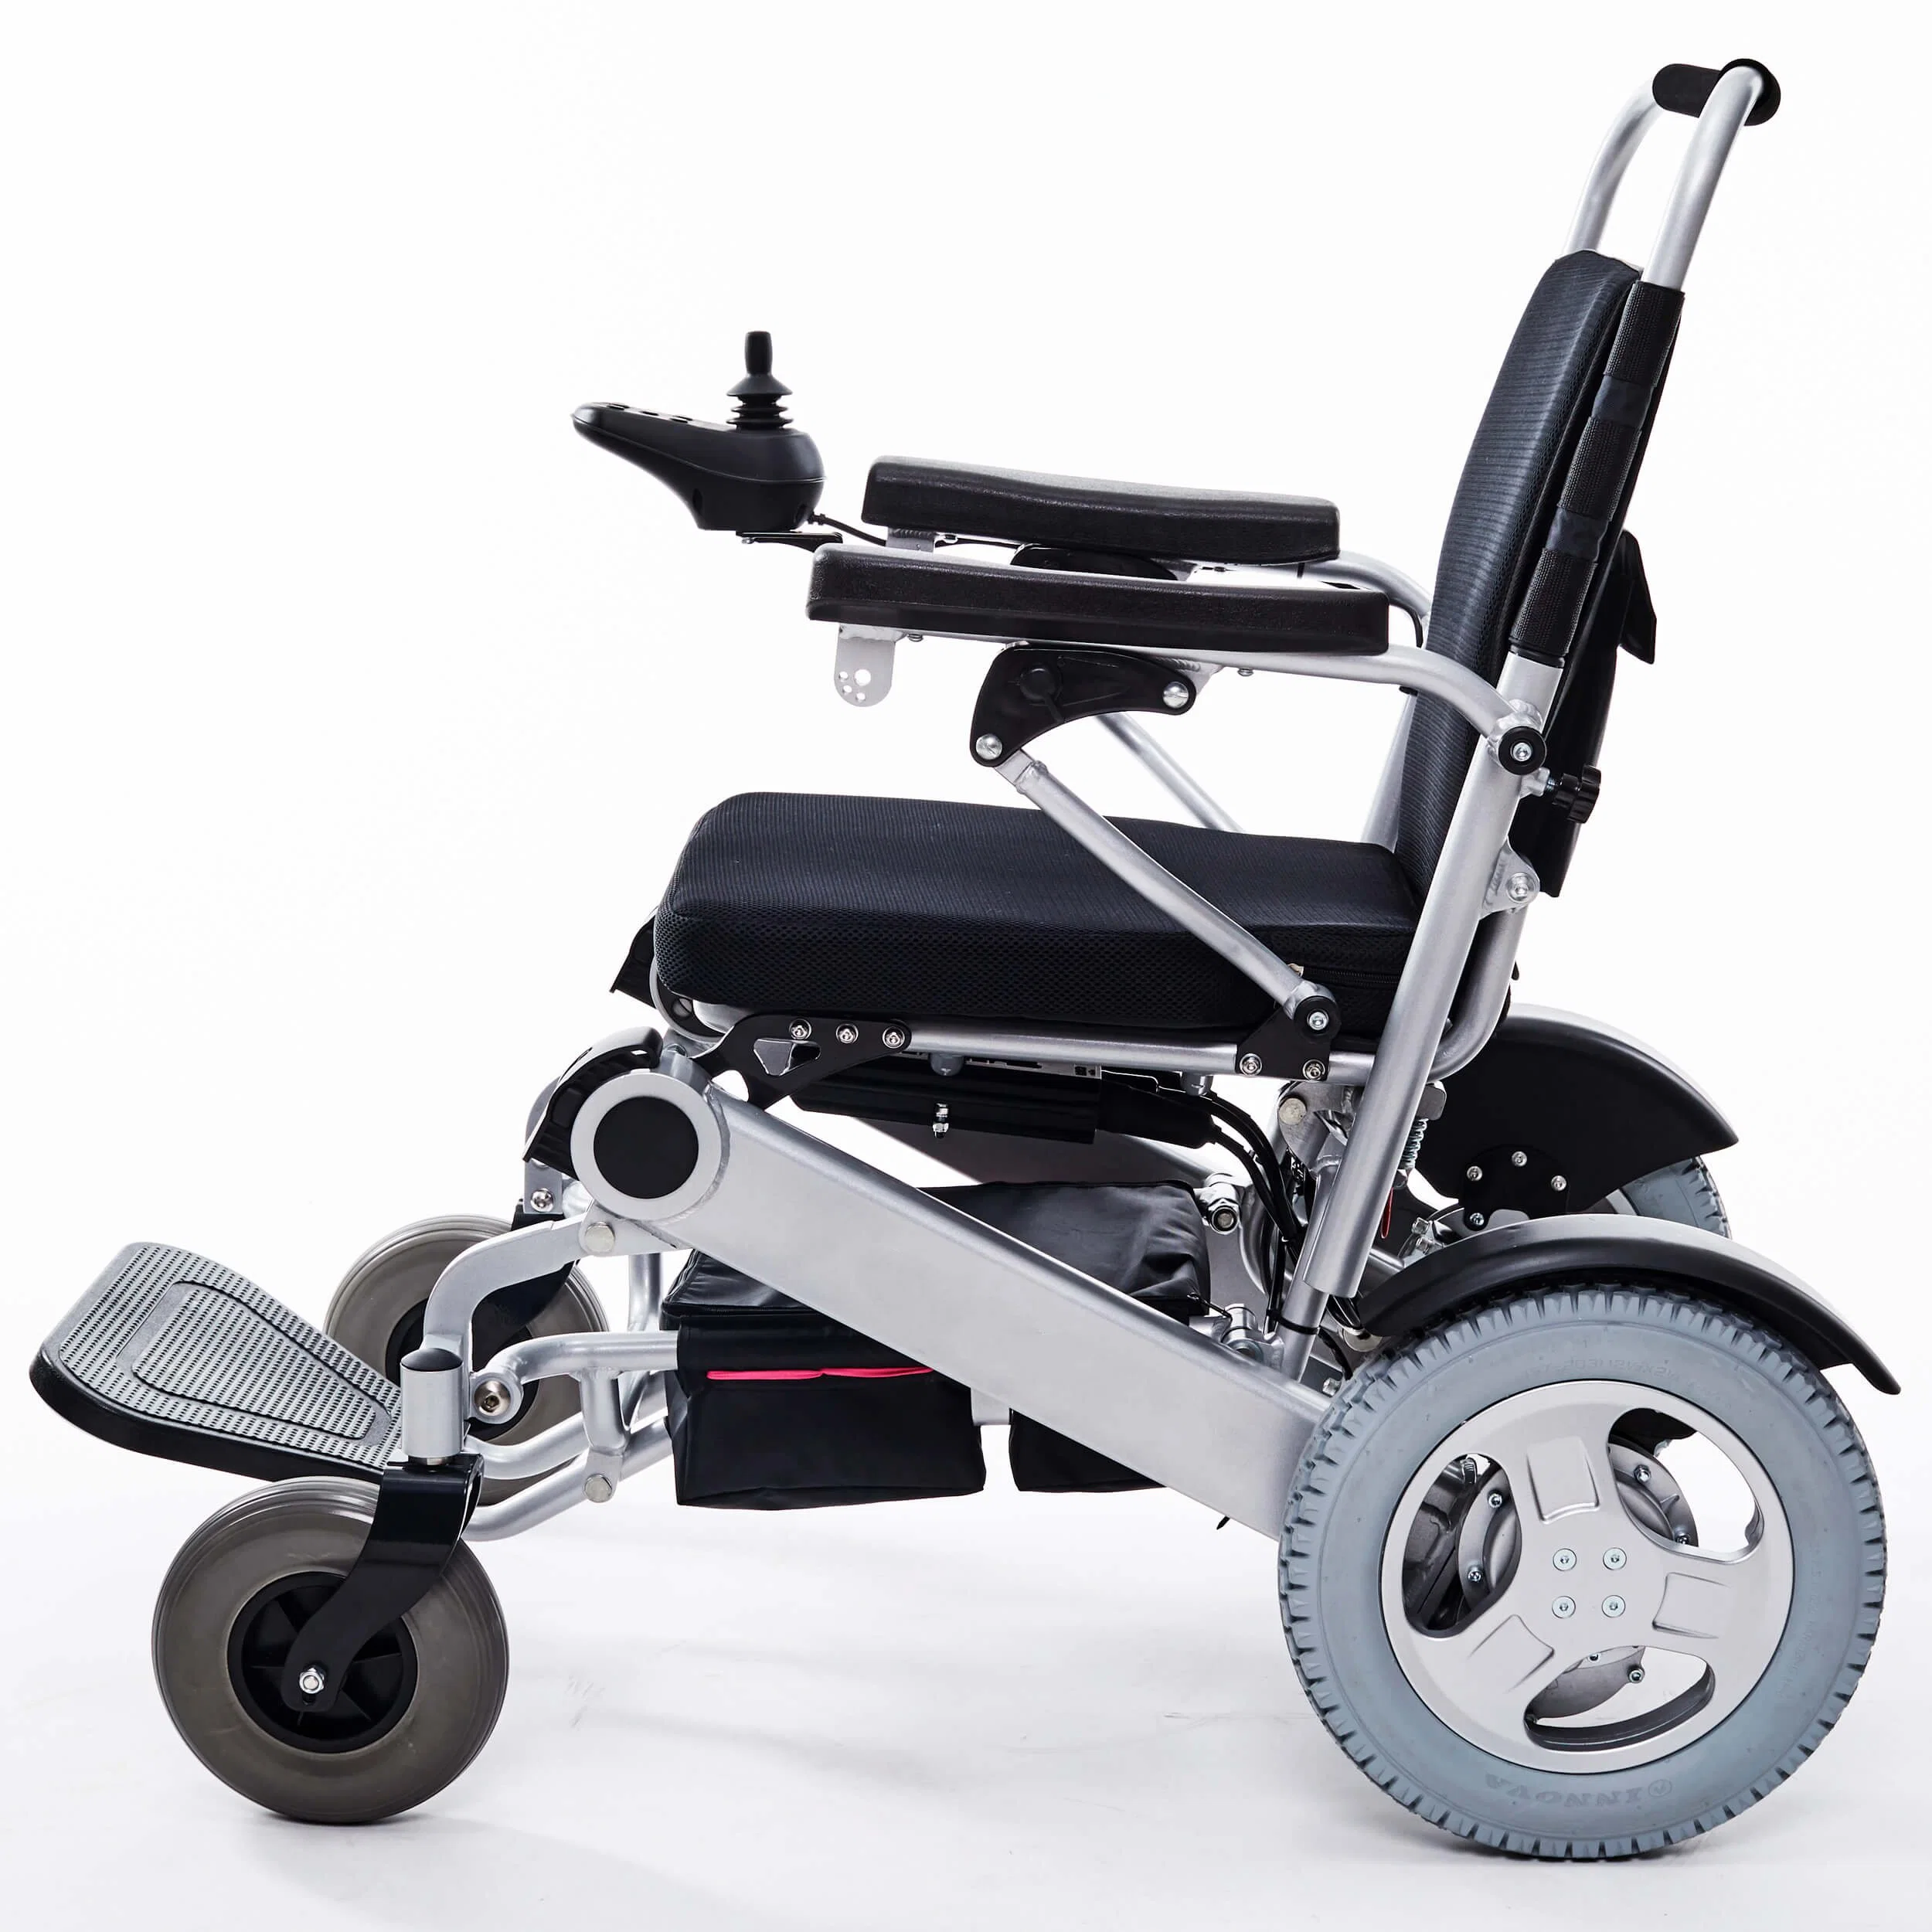 Portable Foldable Lightweight Lithium Battery Wheelchair Motorized Folding Power Electric Wheelchair for Disabled